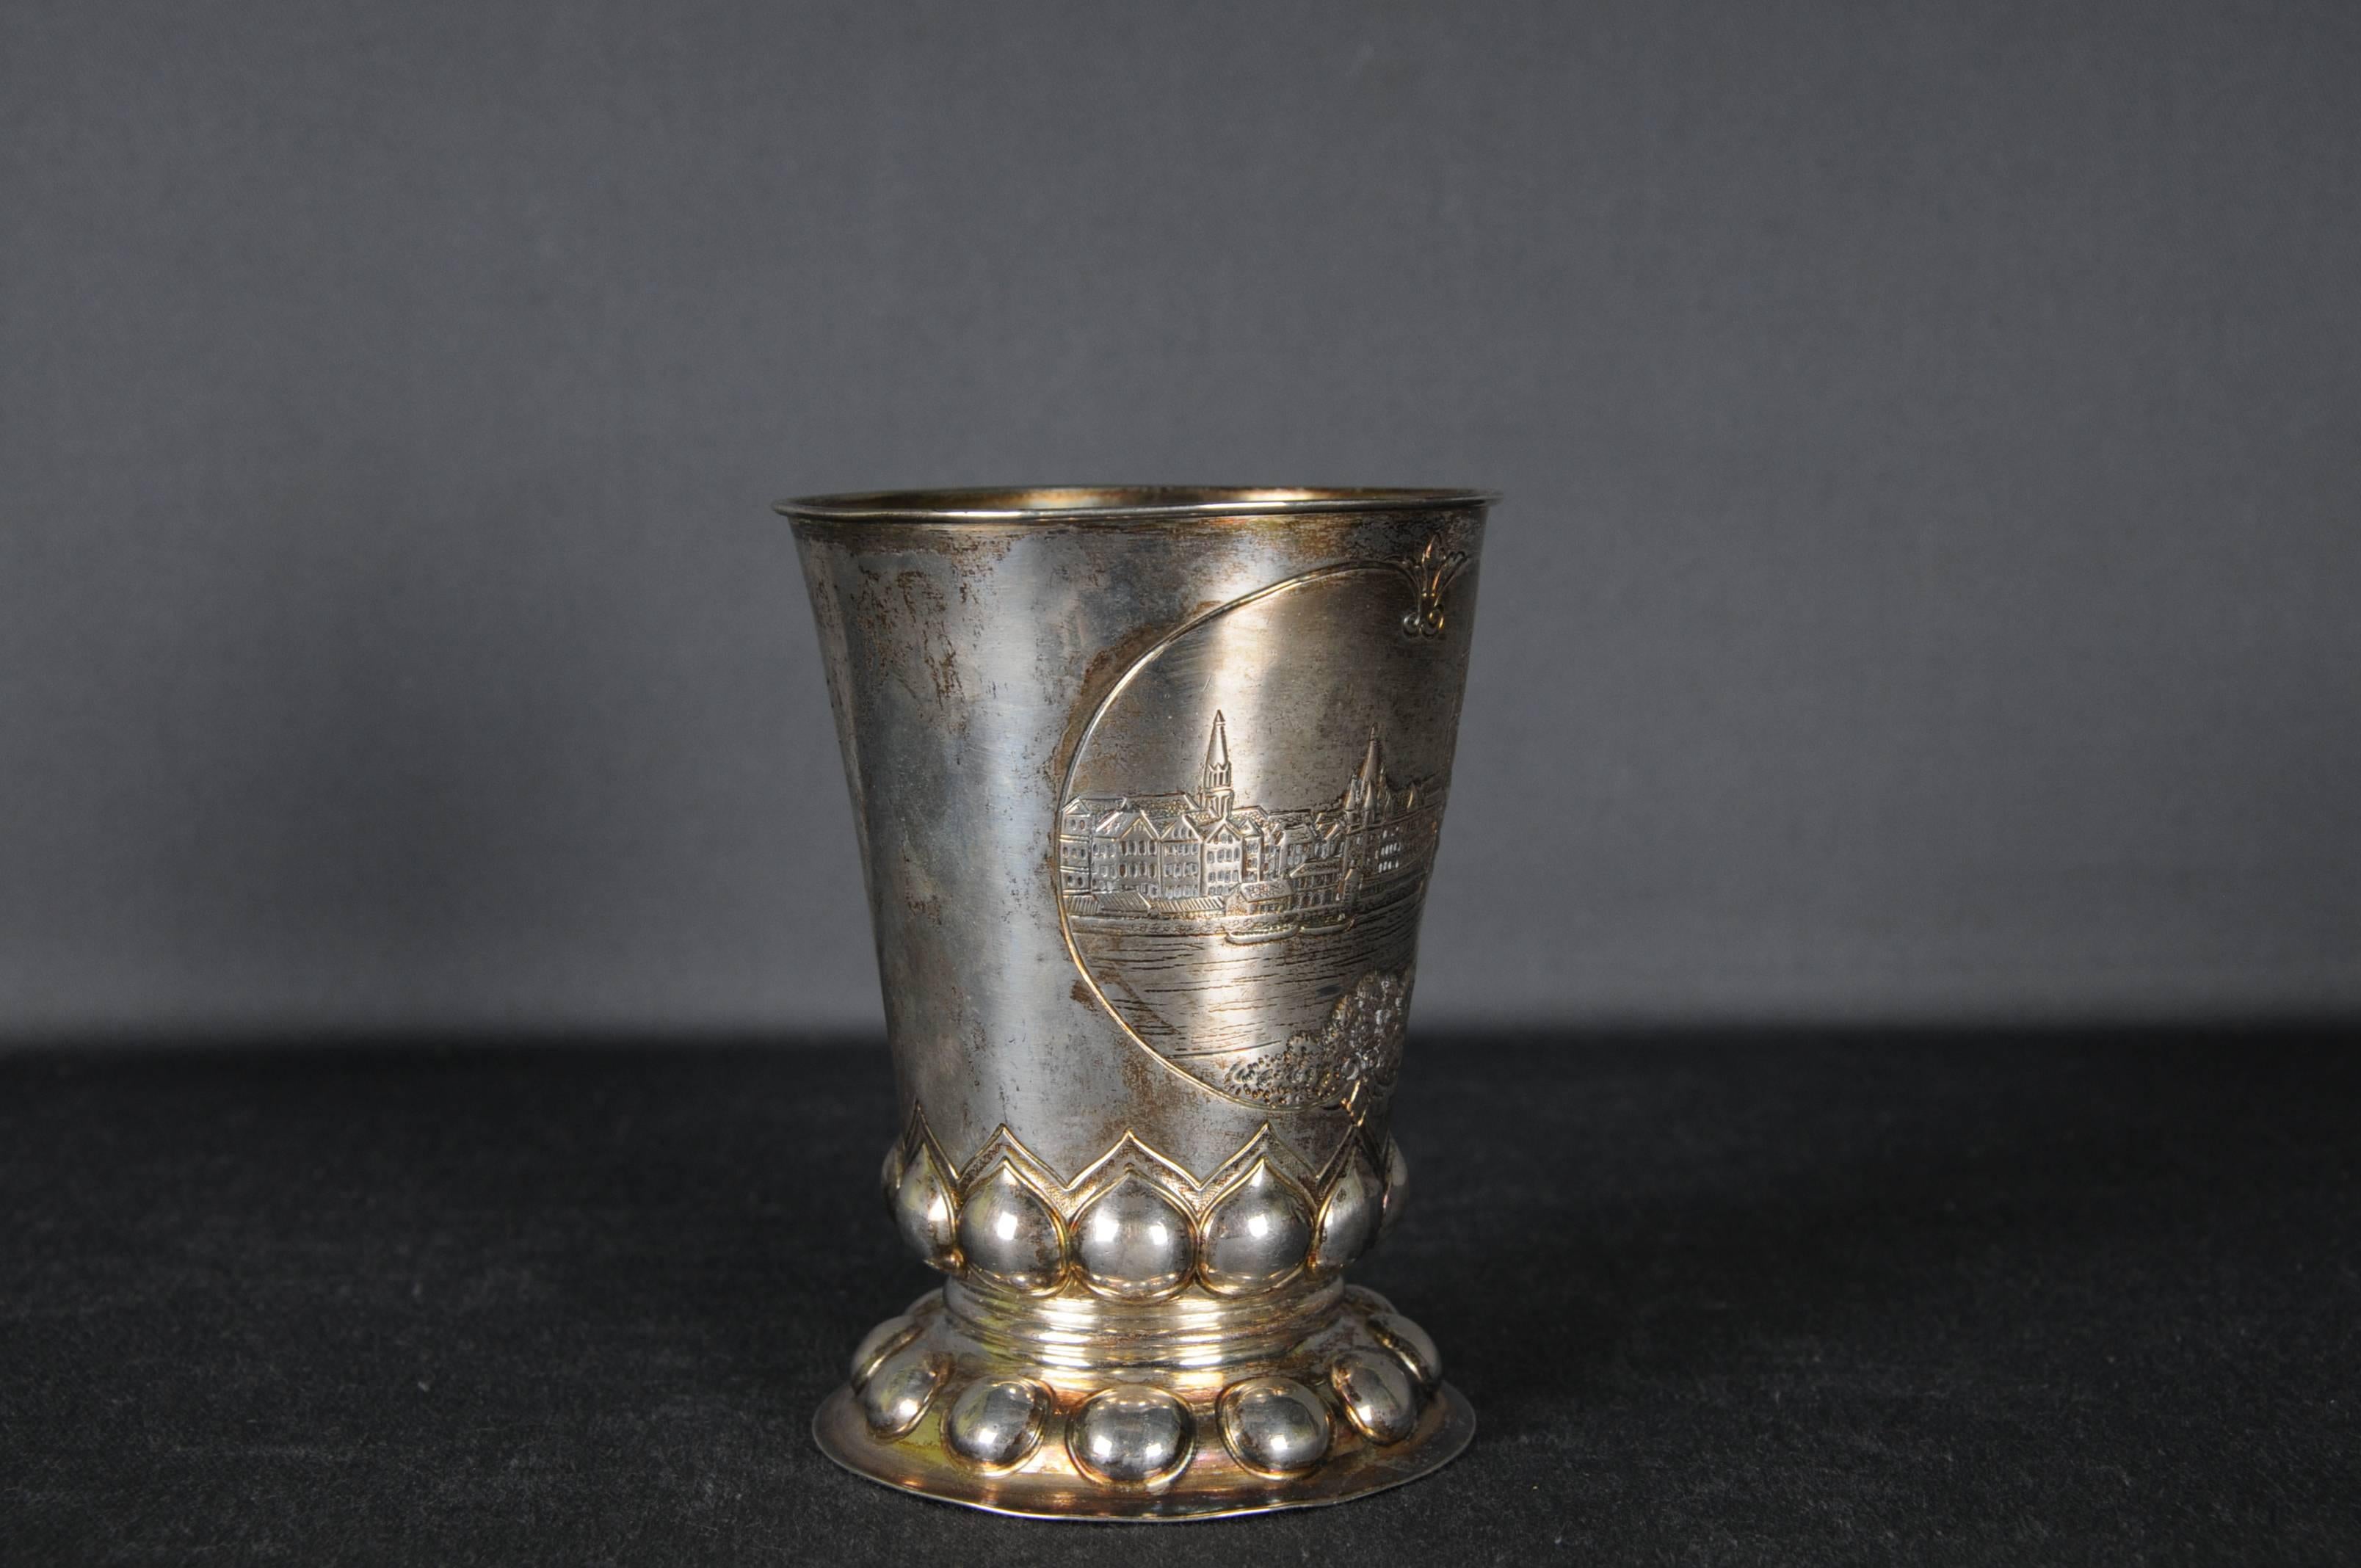 Antique Silver Footcup 800er Silver Germany Cup, gilded, German City View  For Sale 3